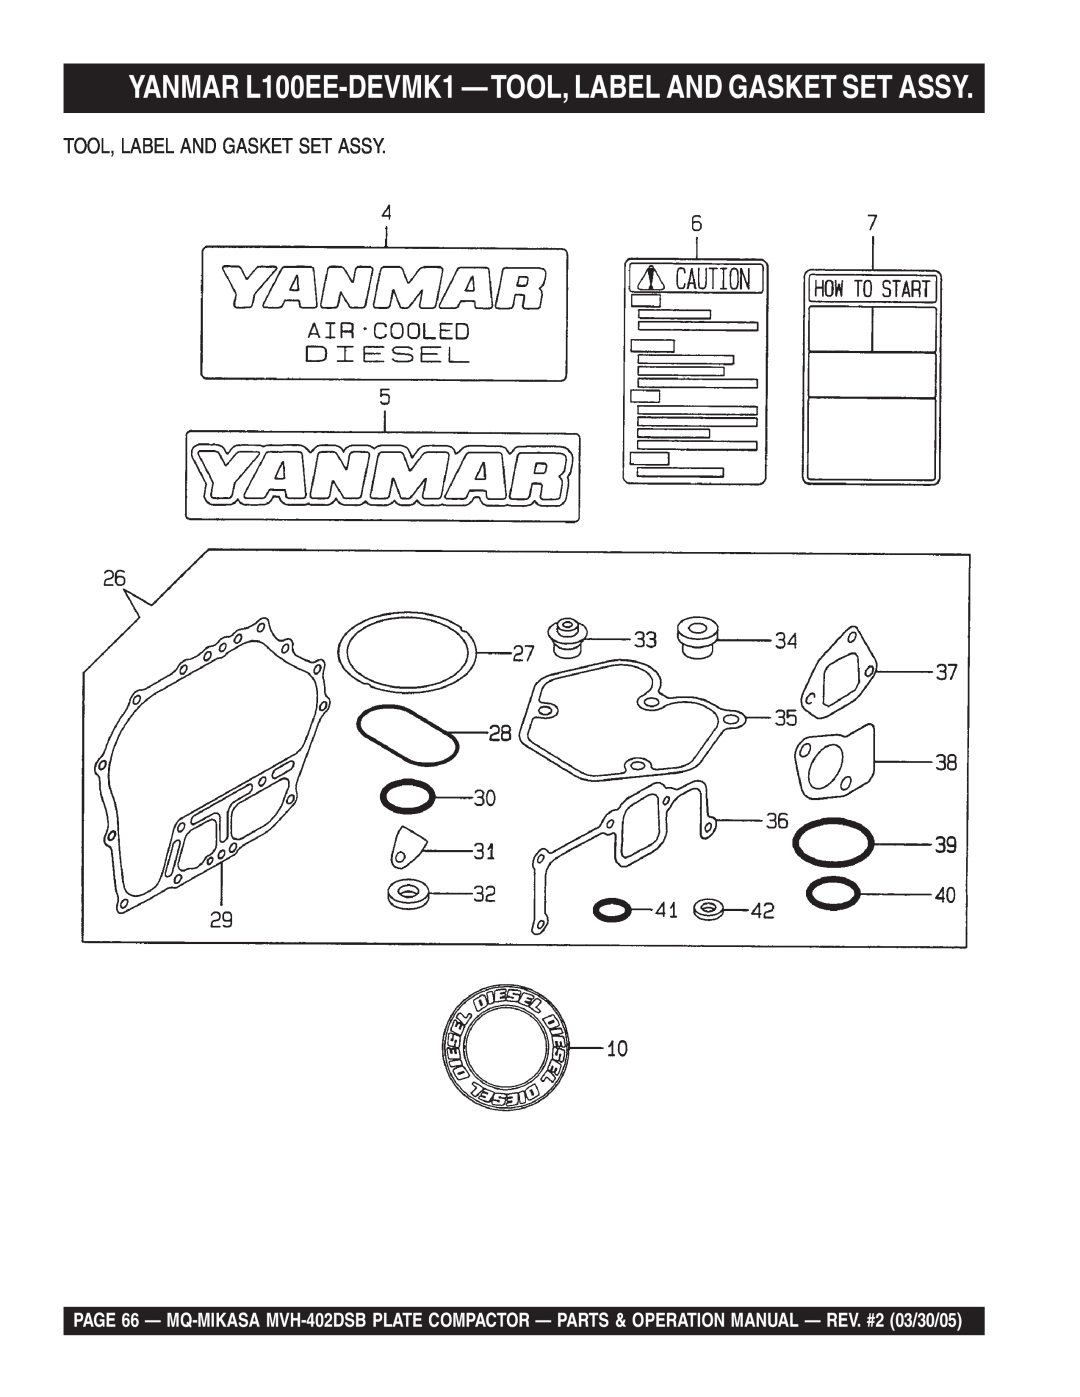 Multiquip MVH-402DSB manual Tool, Label And Gasket Set Assy 